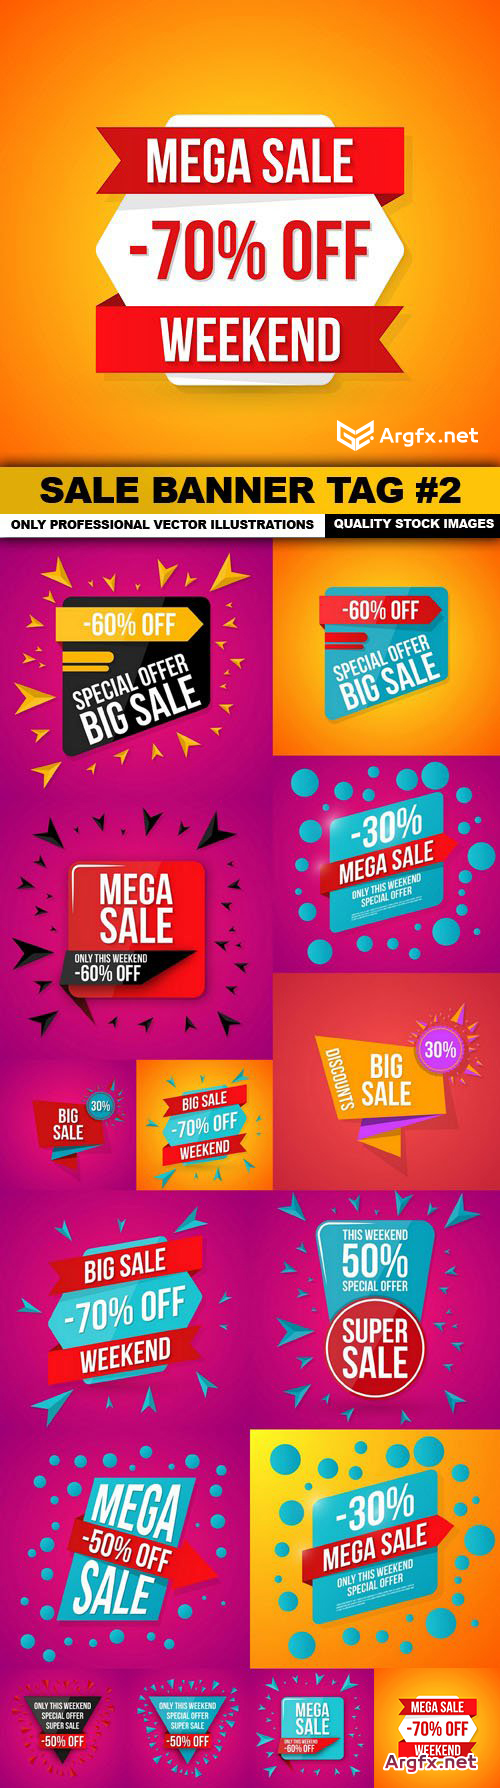  Sale Banner Tag #2 - 15 Vector